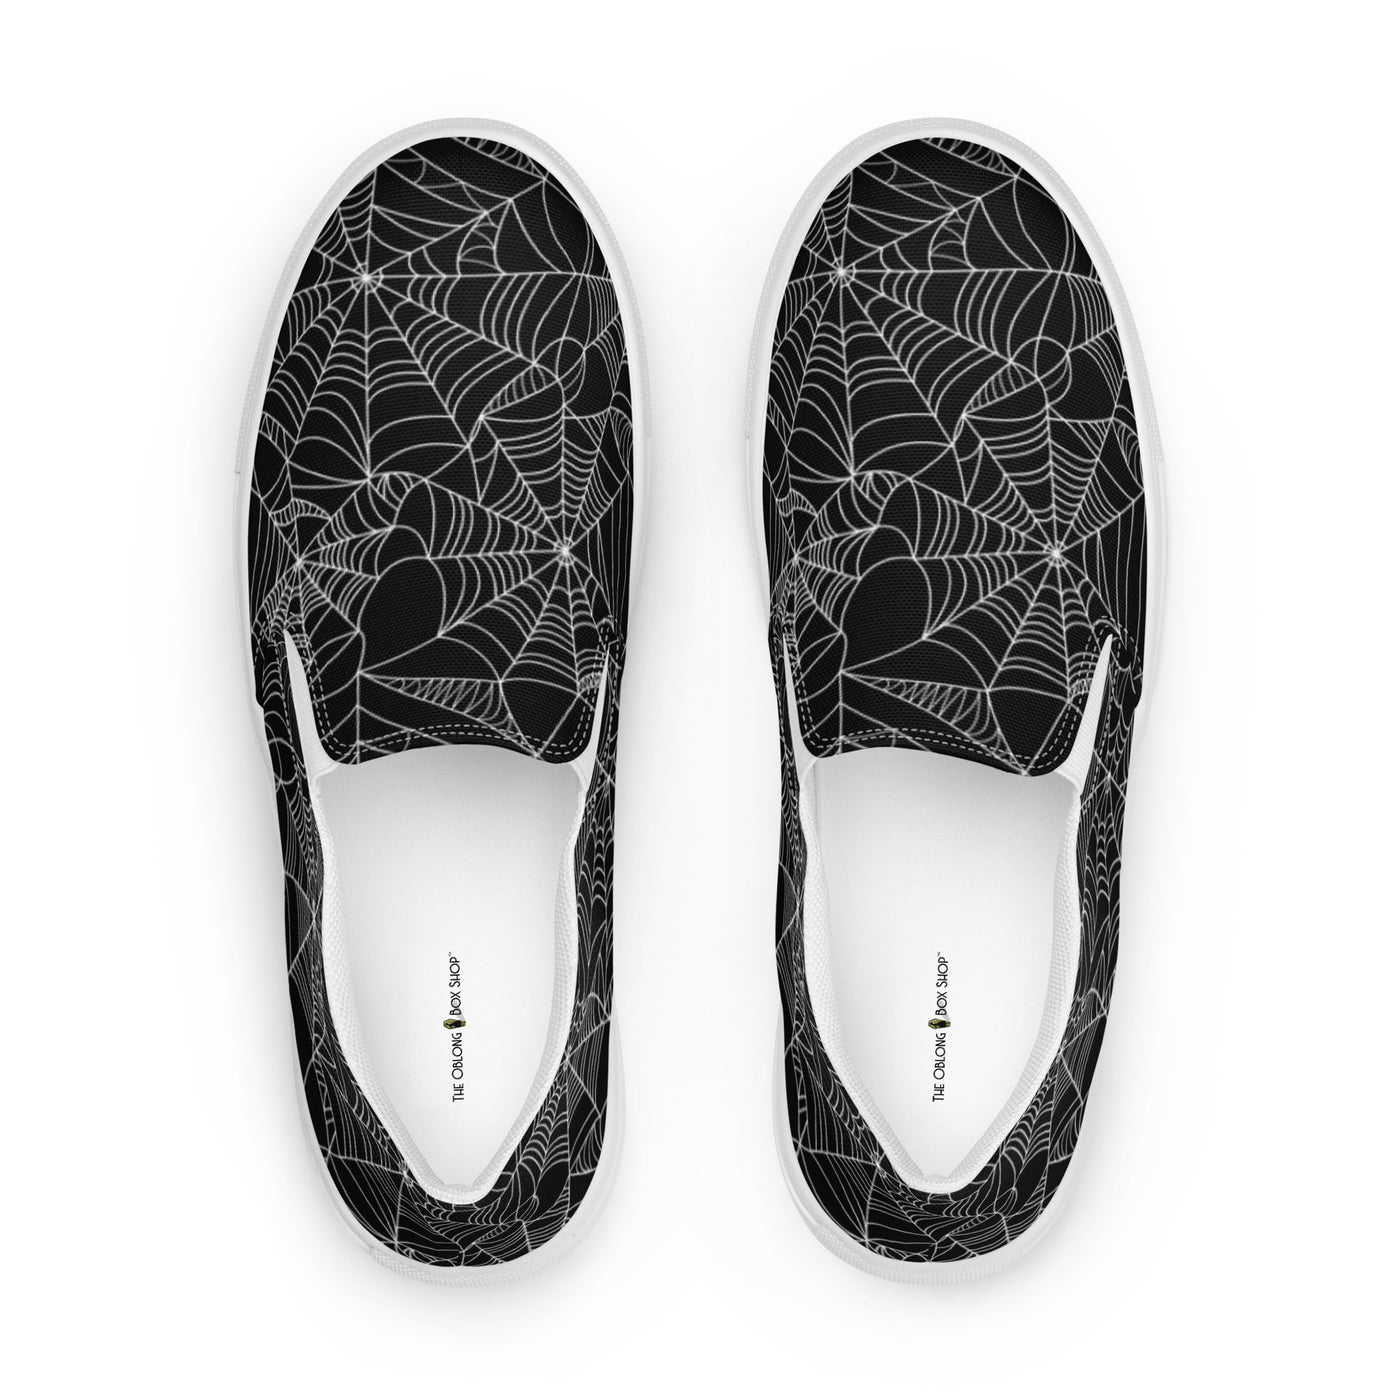 Tangled Web Spiderweb Women’s slip-on canvas shoes